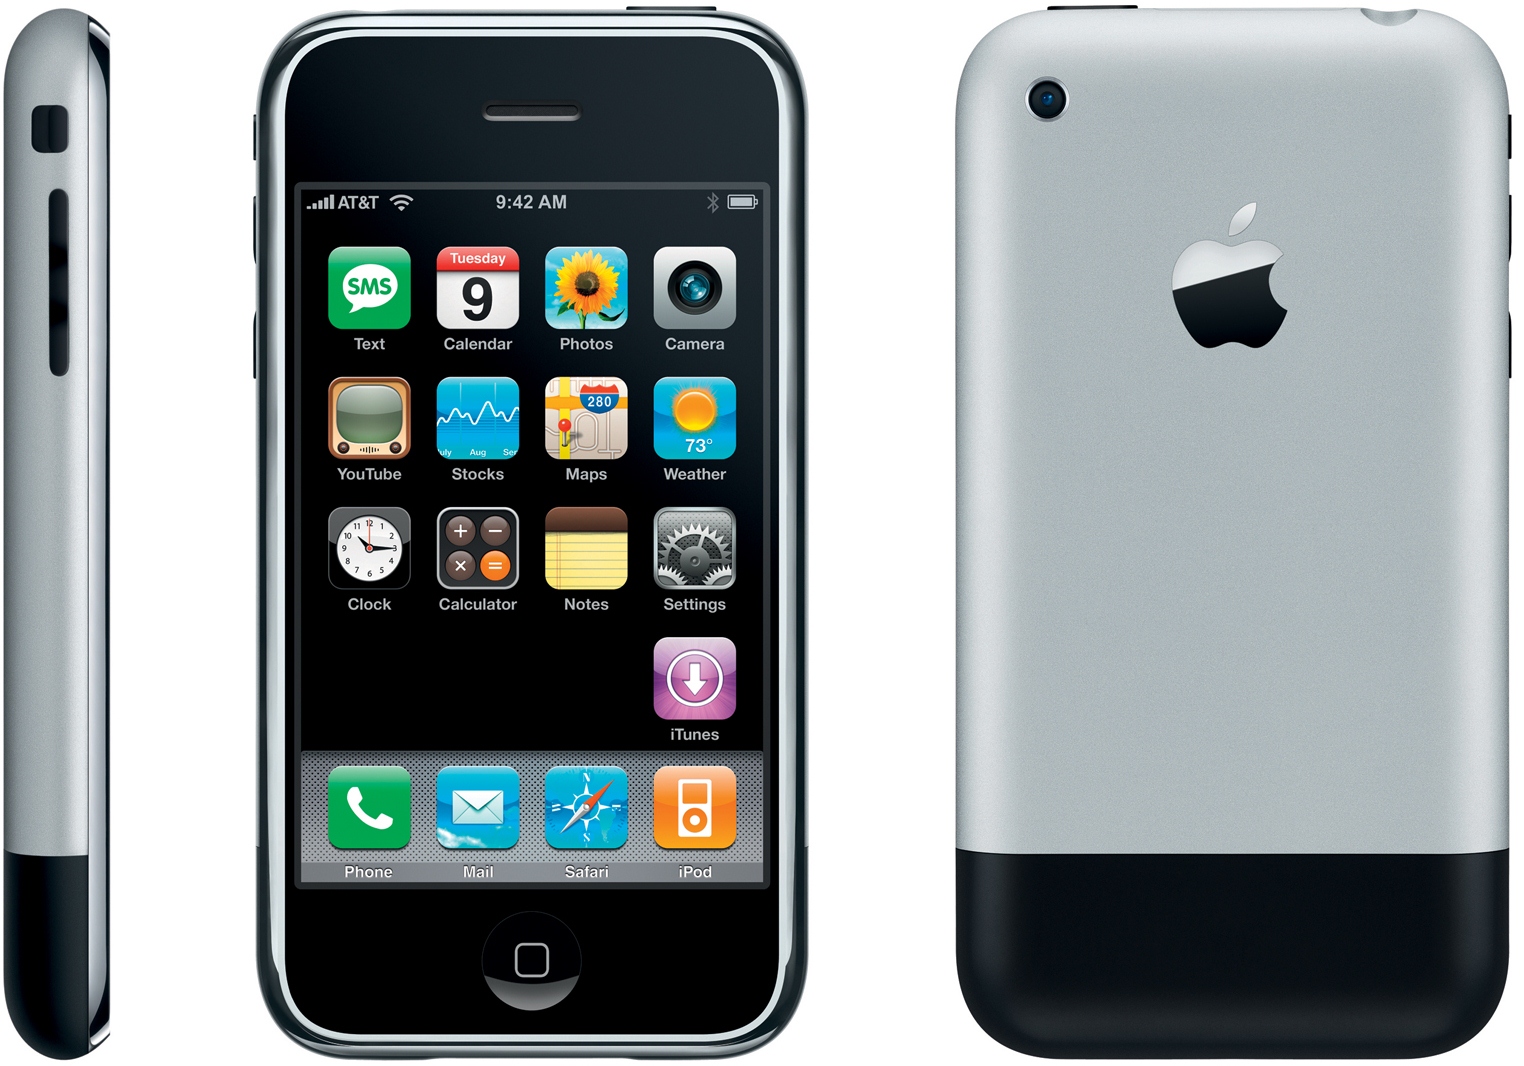 Original iPhone: Reaction and Comments to Apple’s first device | BGR